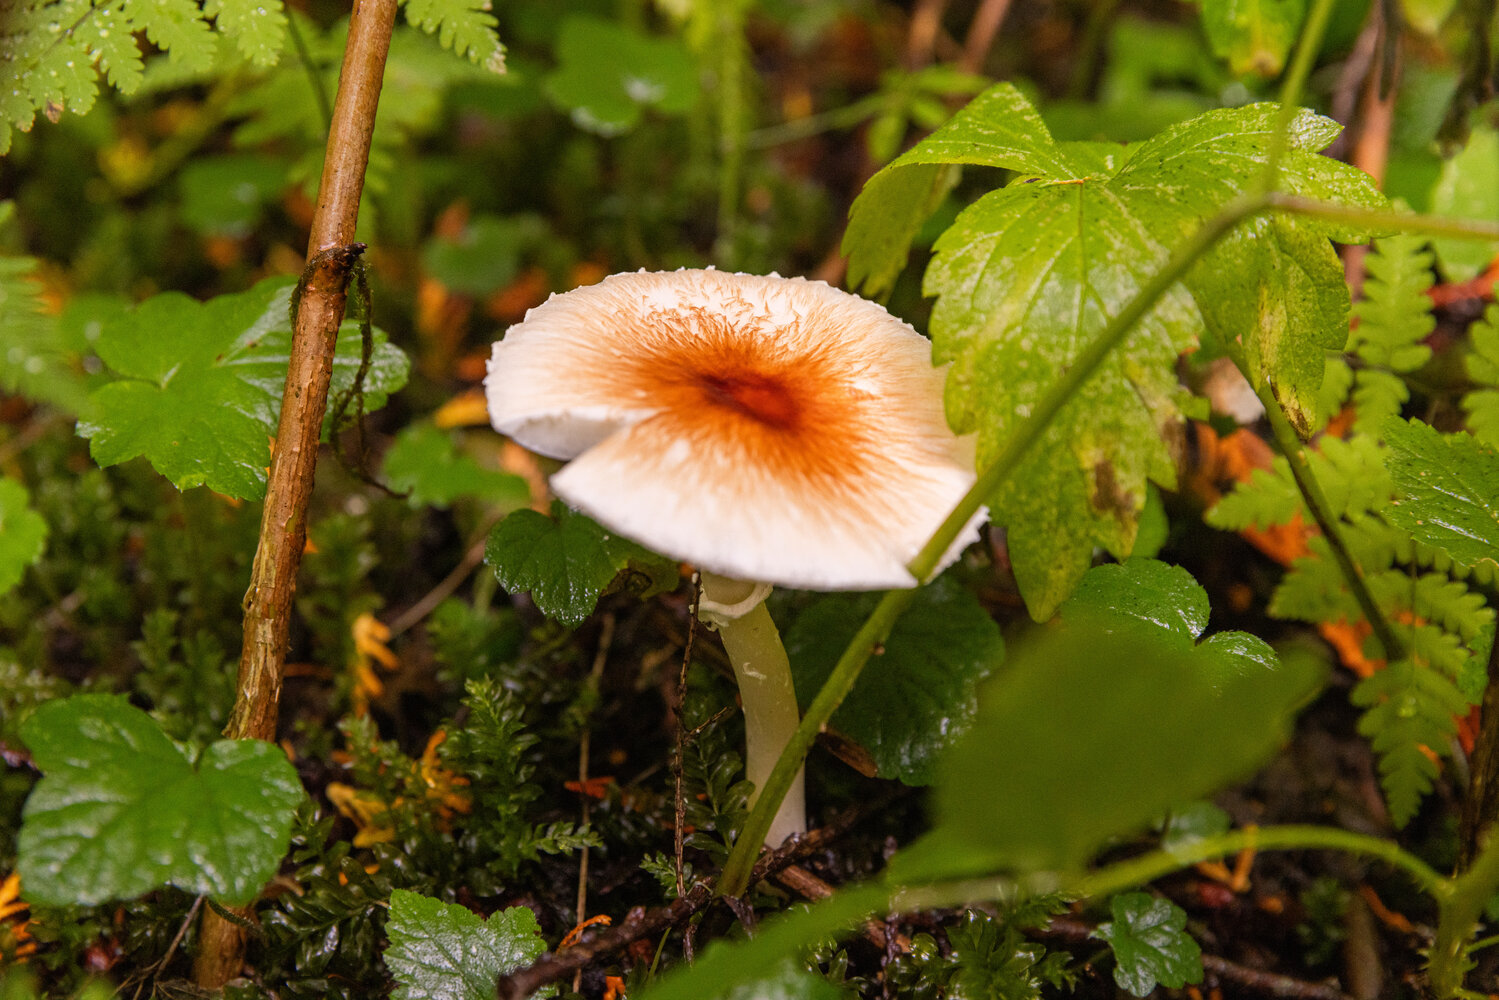 Mushrooms grow in the Grove of the Matriarchs on Thursday, Sept. 28, in the Gifford Pinchot National Forest.